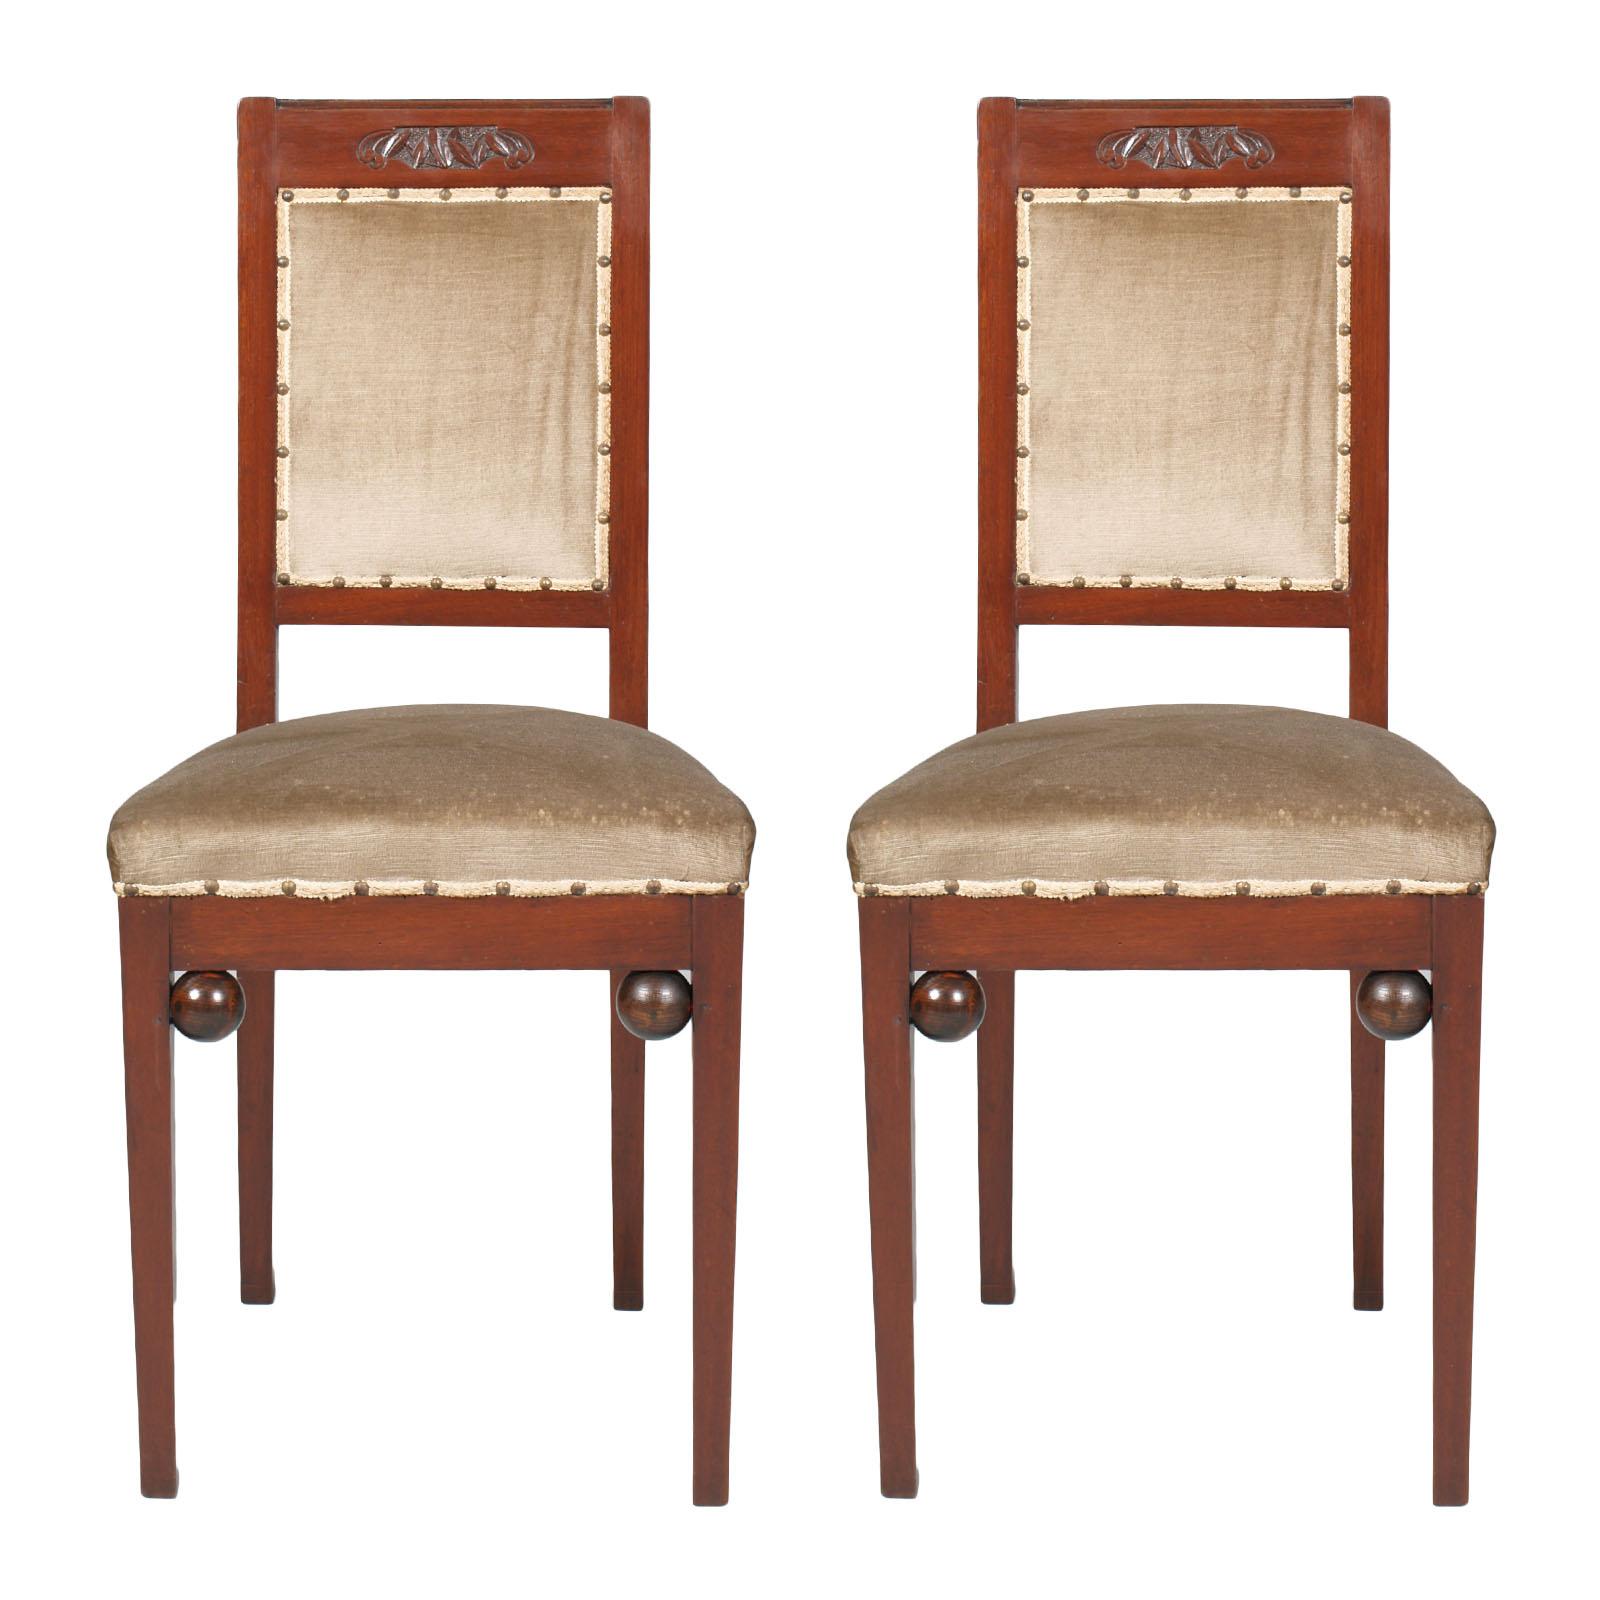 Early 20th century pair of Wiener Werkstätte Modernist chairs in walnut, original taupe velvet upholstery, still usable.


Measures cm: H100/50, W 45, D 45.